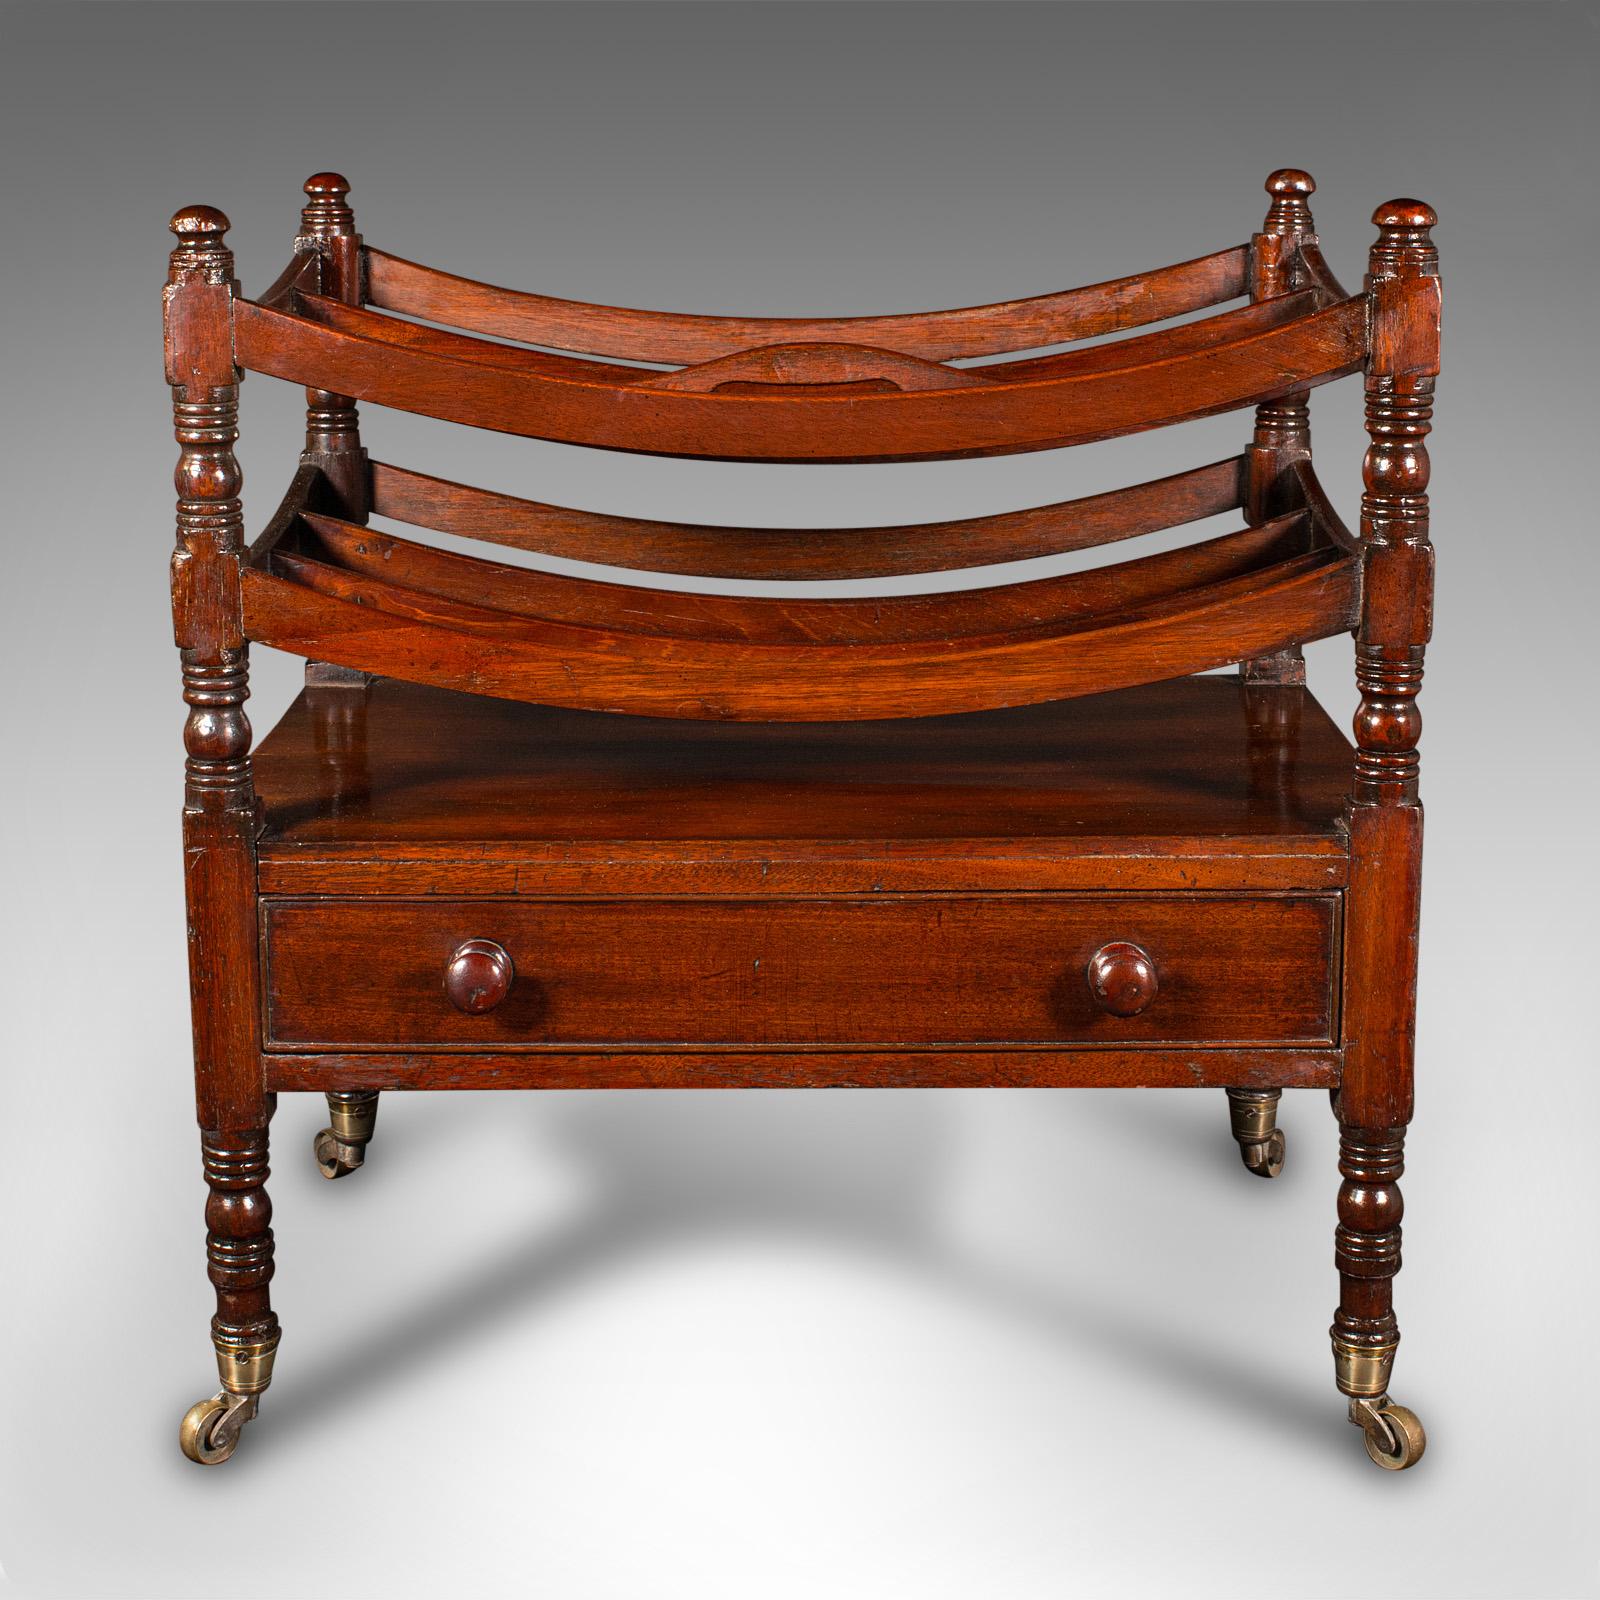 This is an antique Canterbury stand. An English, mahogany and oak four compartment magazine rack, dating to the Regency period, circa 1820.

Appealing late Georgian craftsmanship, ideal for the living room or conservatory
Displaying a desirable aged